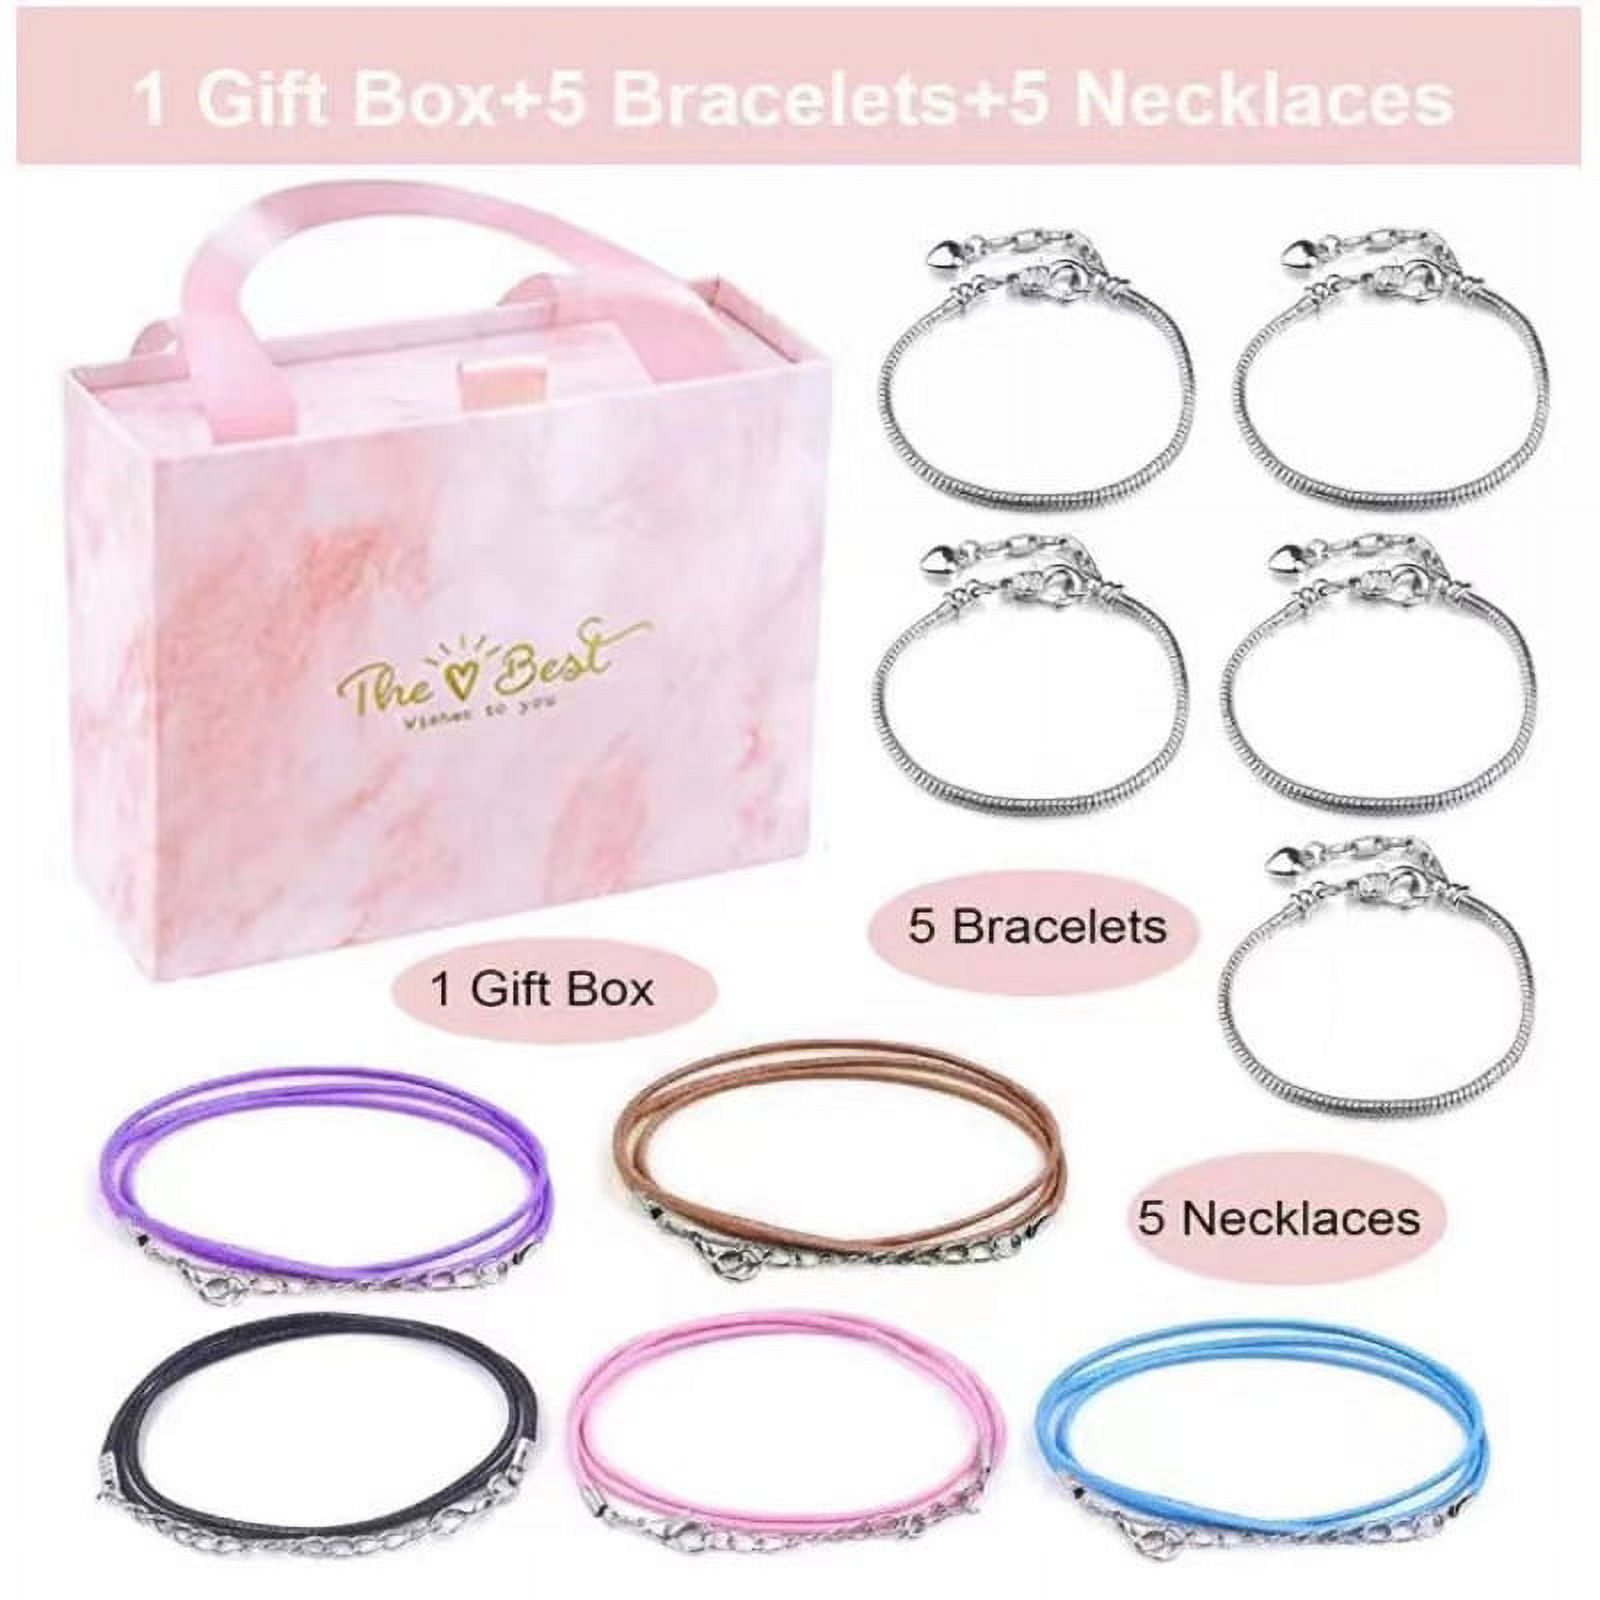 Charm Bracelet Making Kit for Girls, Kids' Jewelry Making Kits Jewelry Making Charms Bracelet Making Set with Bracelet Beads, Jewelry Charms and DIY Crafts with Gift Box 93 Pieces - image 3 of 5